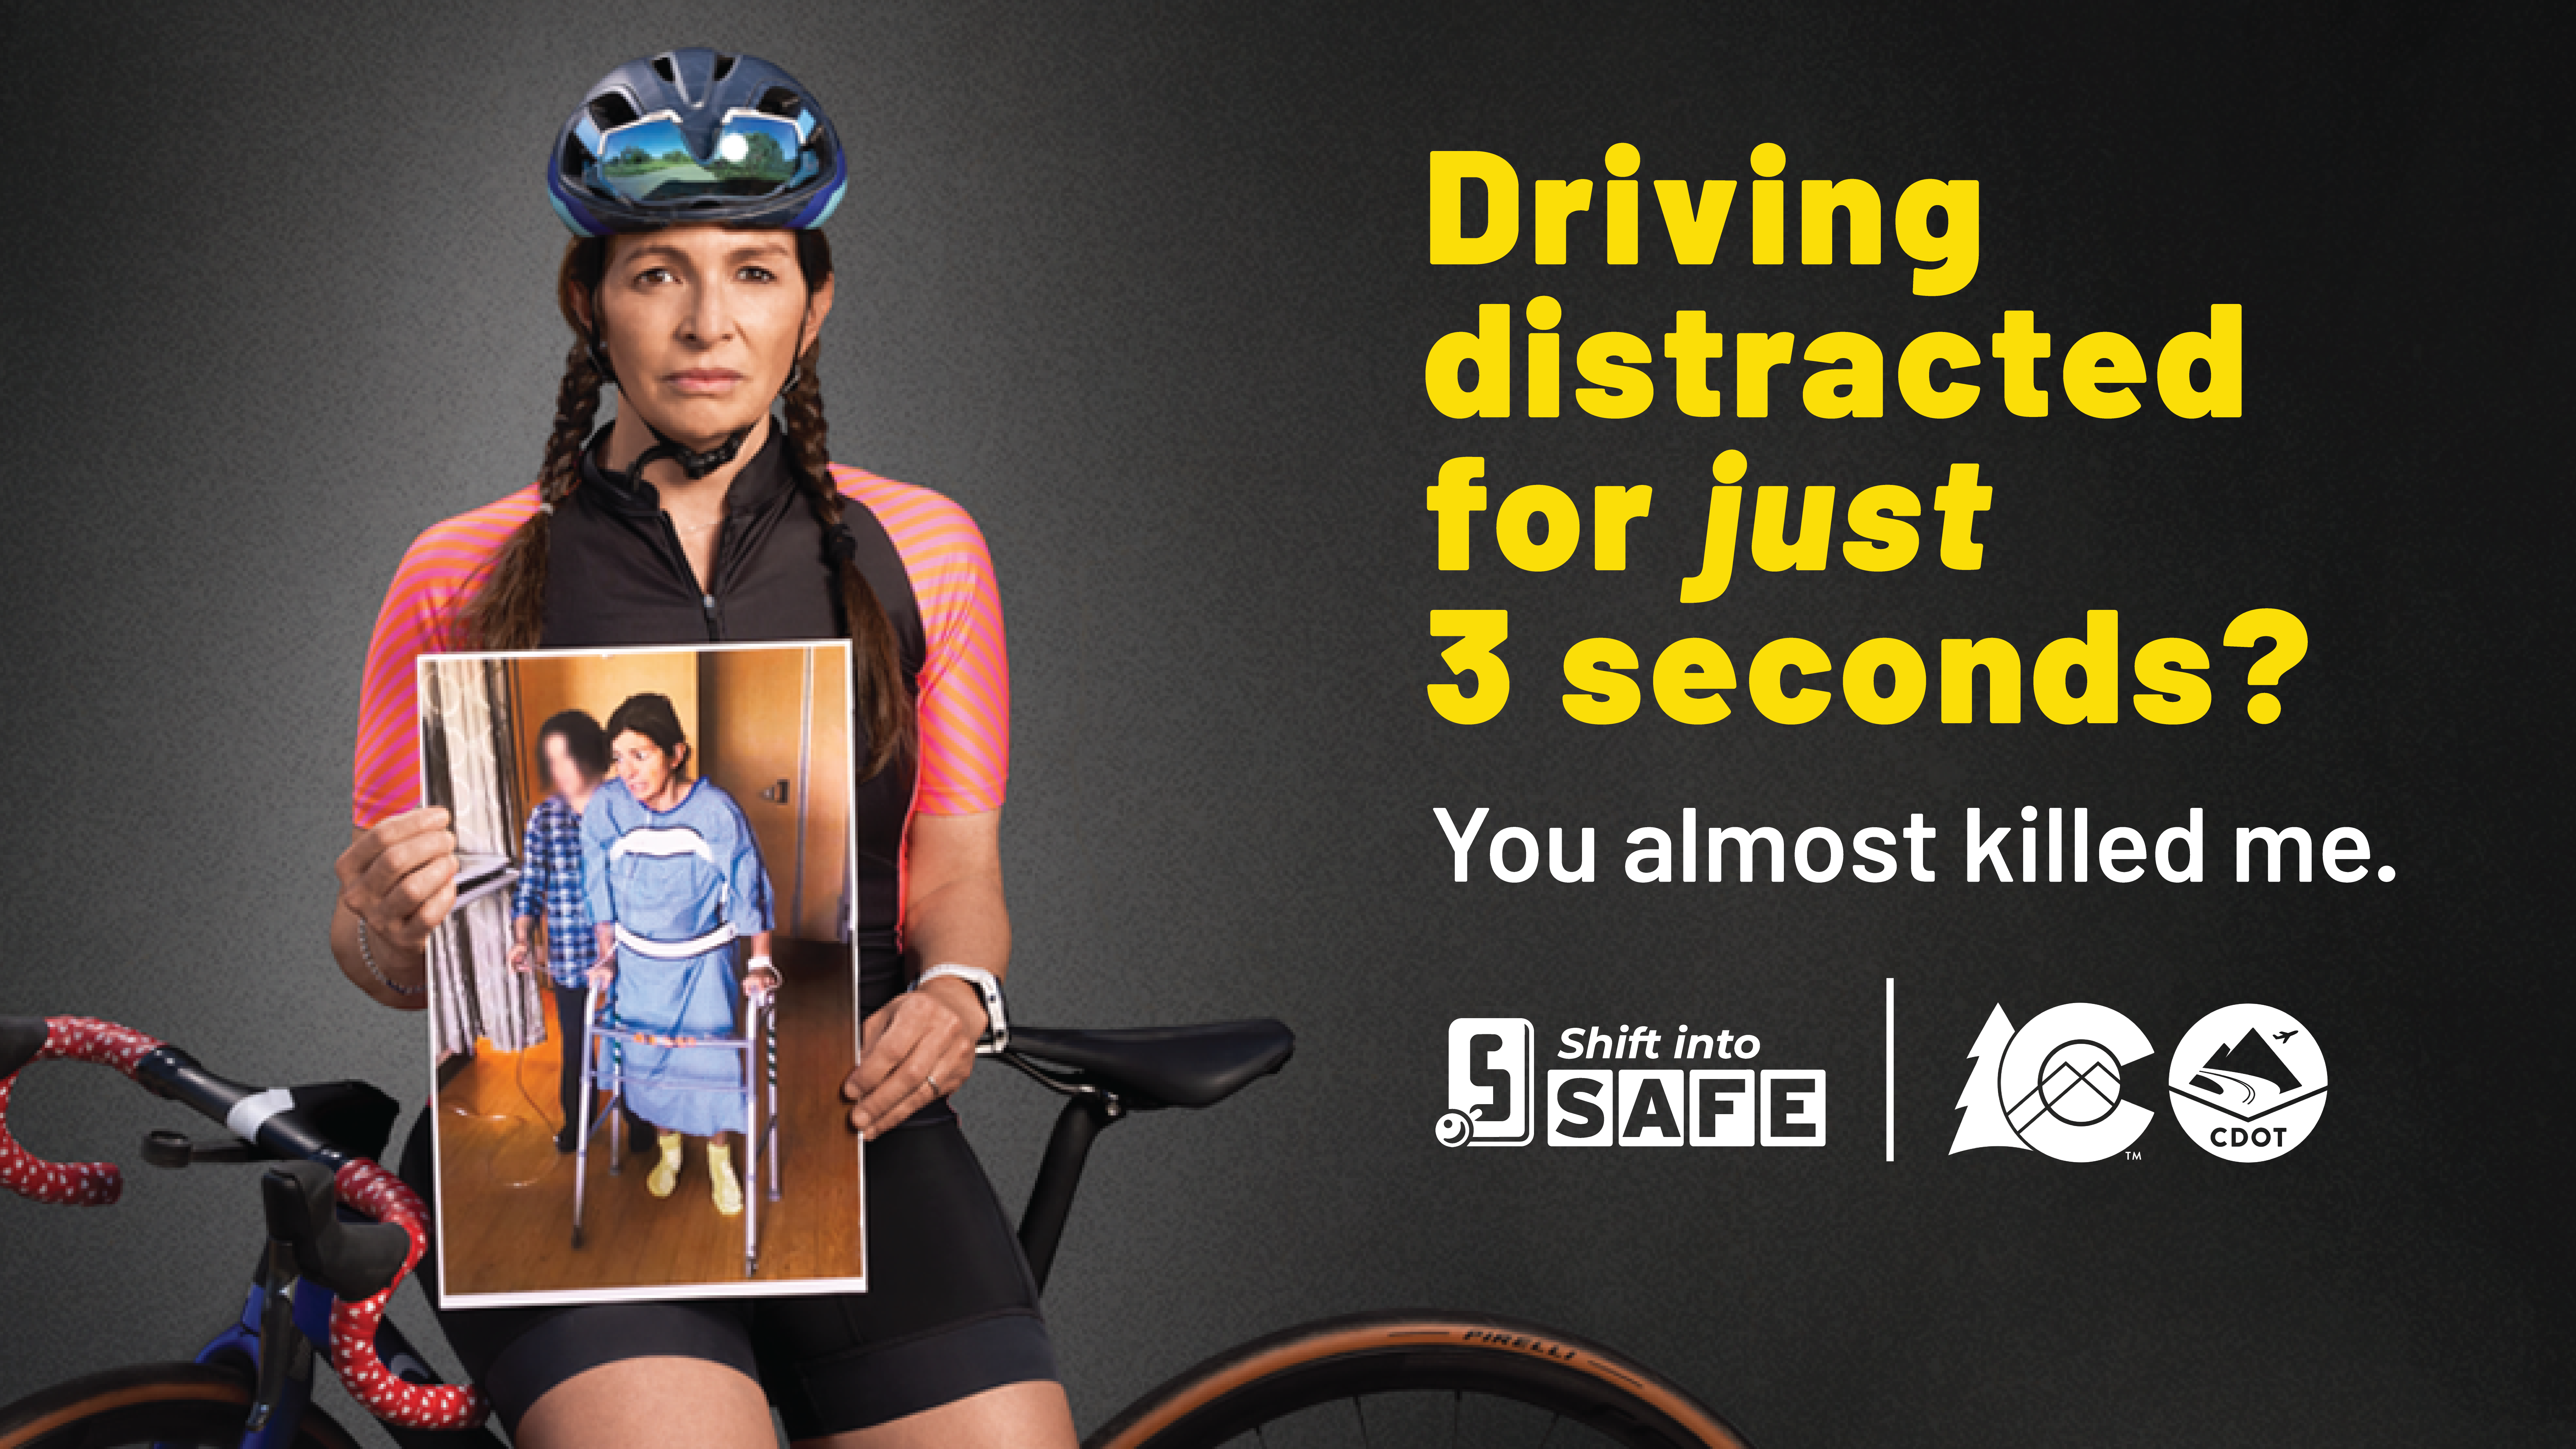 Shift into Safe - Distracted Driving Graphic detail image